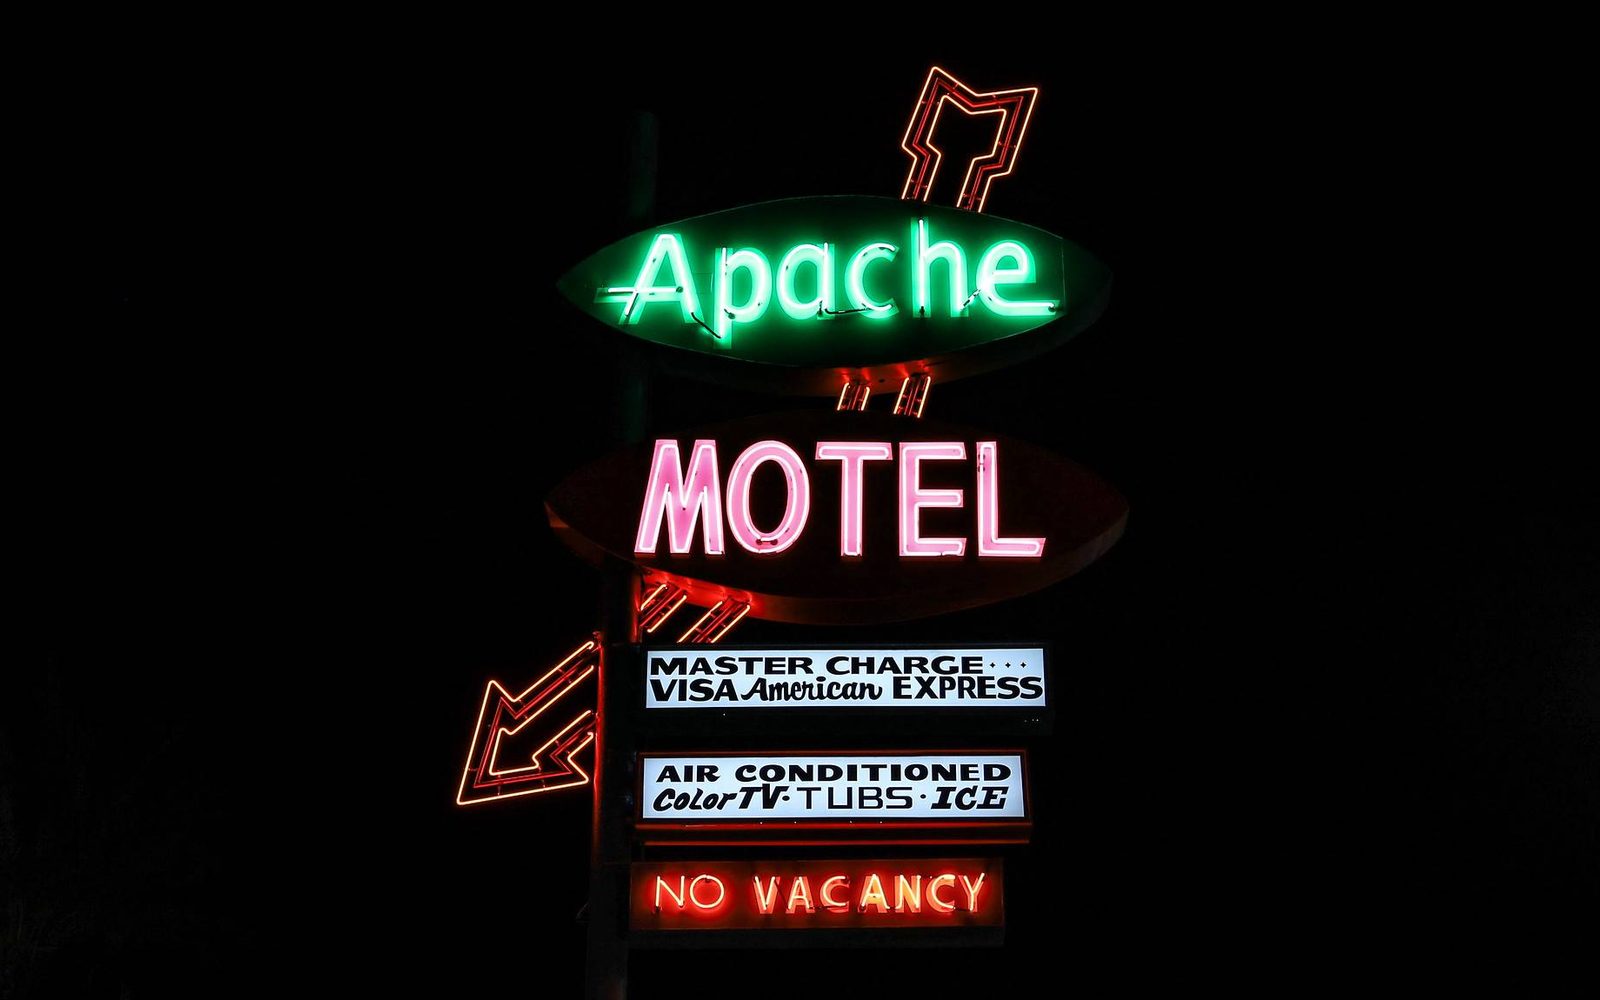 Apache Motel - part of the Las Vegas Scenic Byway Project